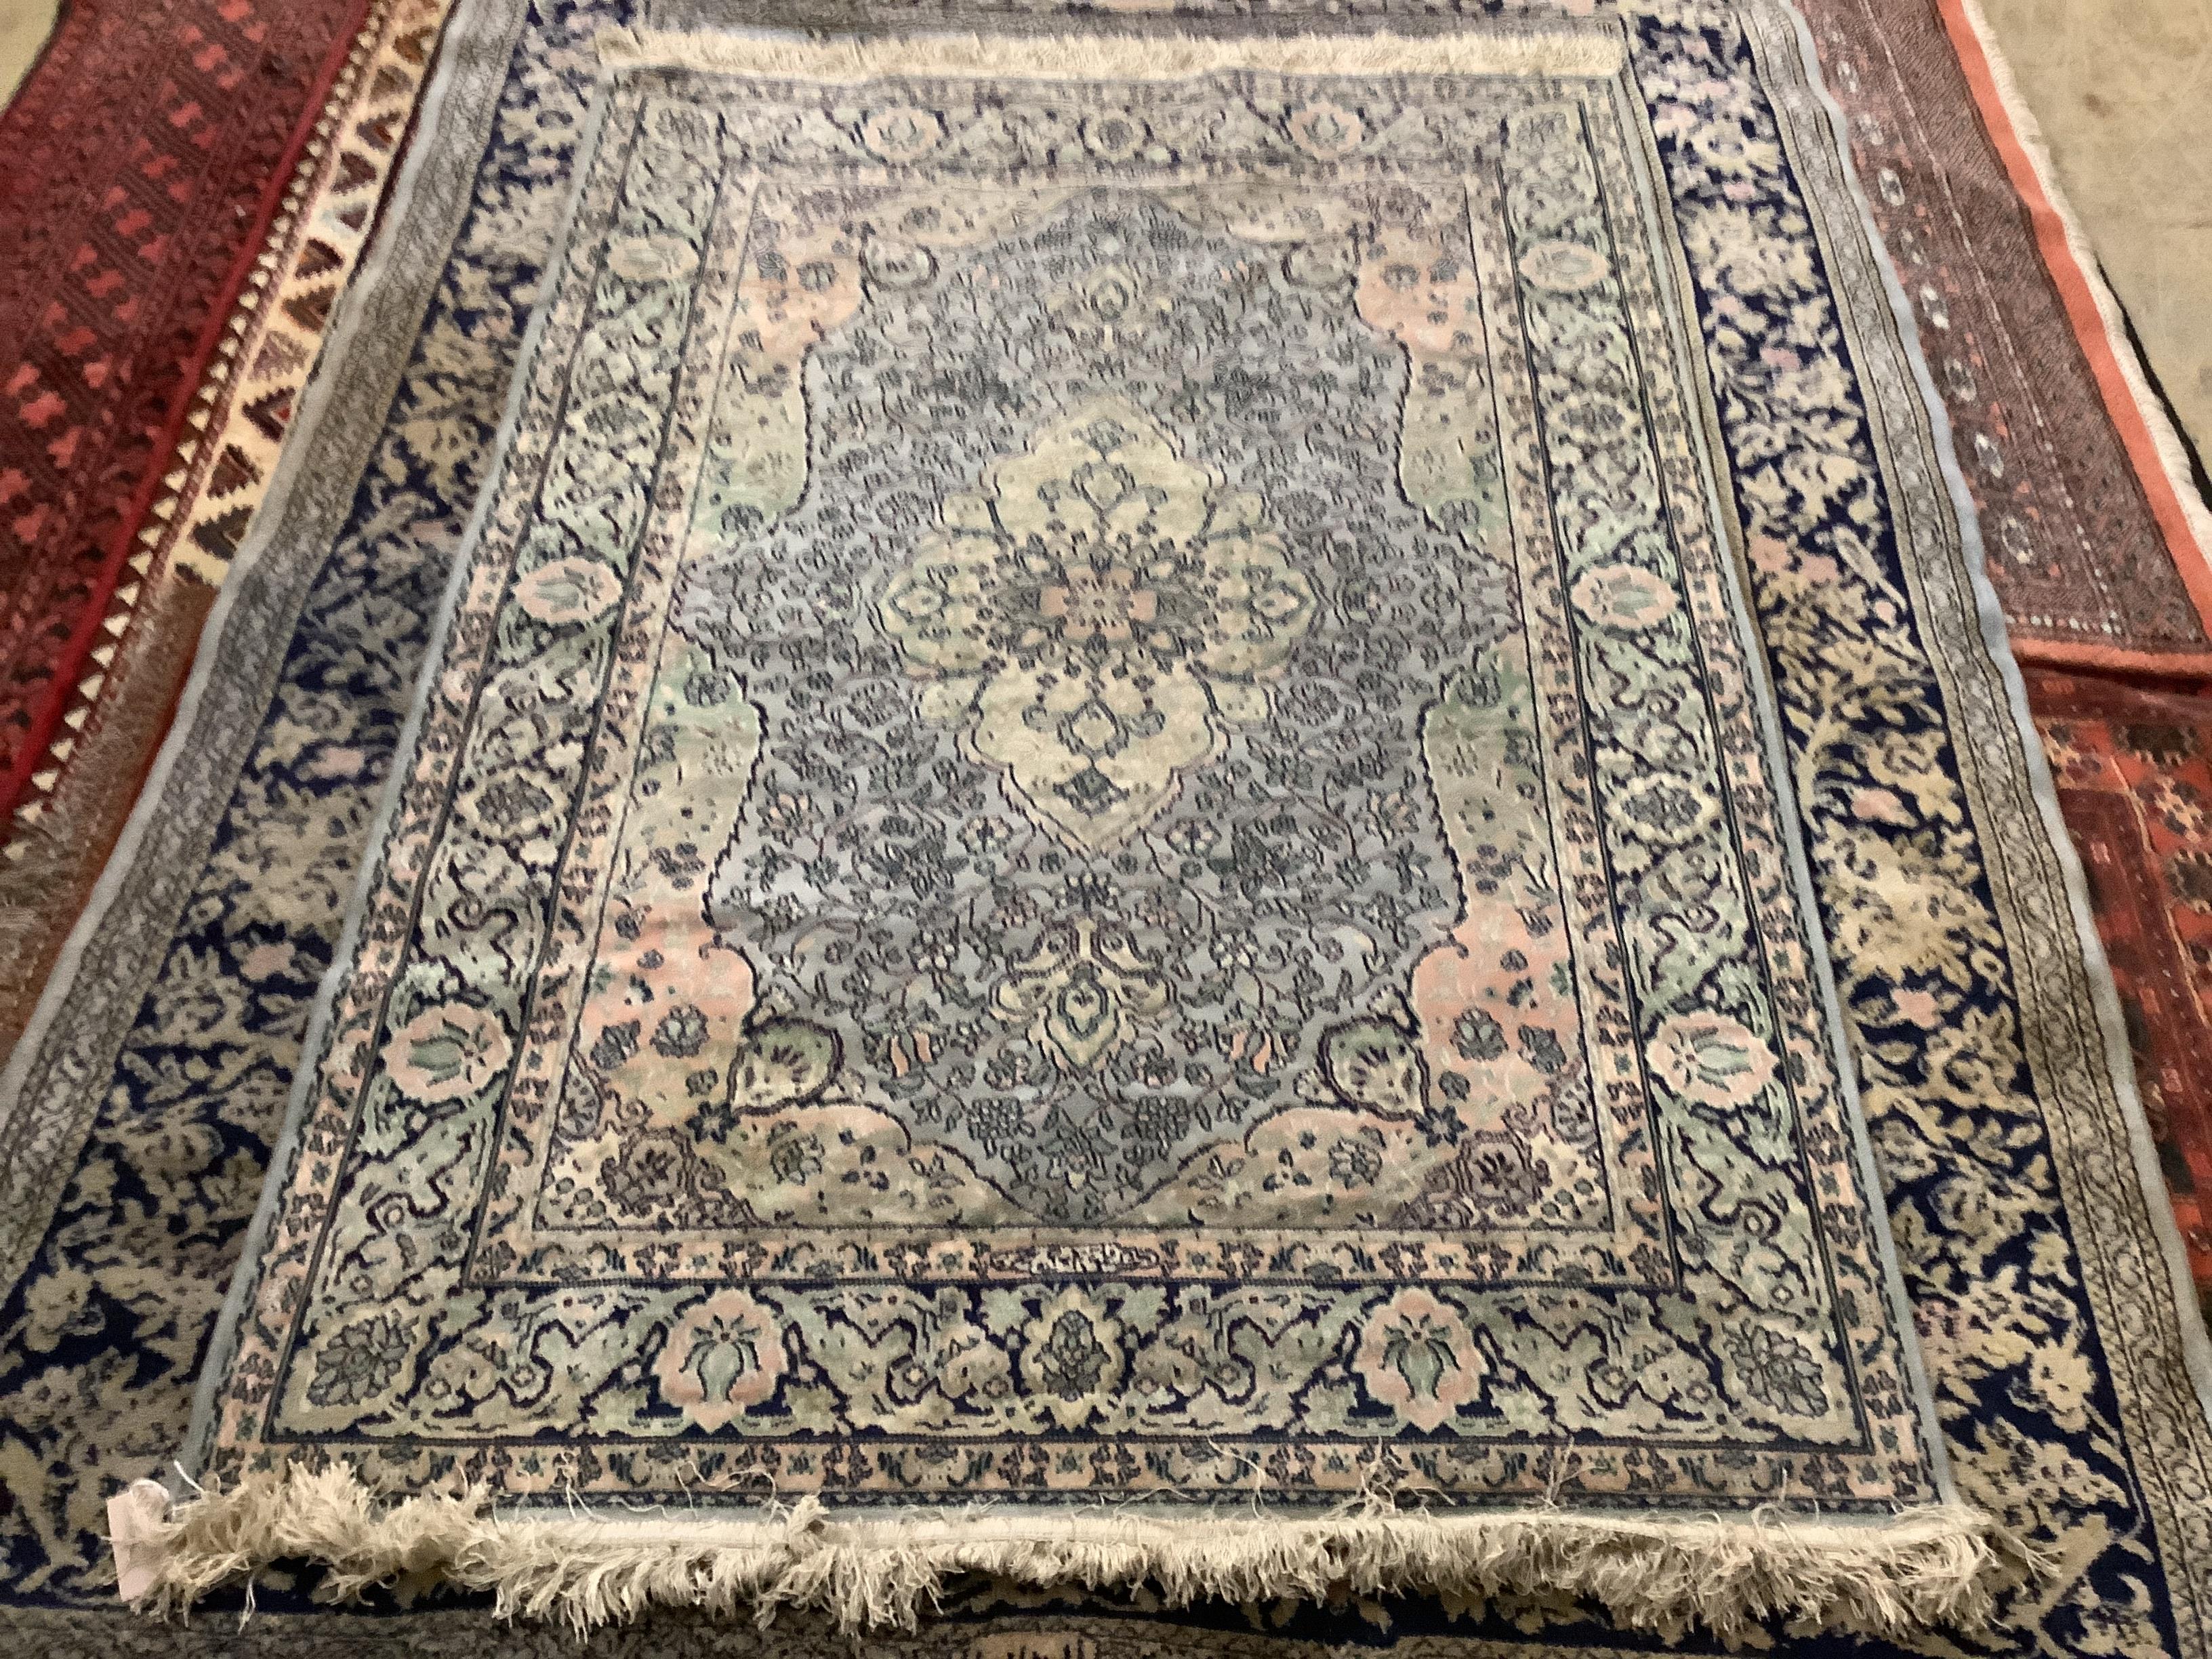 Two Persian style pale blue ground carpets, 239 x 170cm and 170 x 123cm